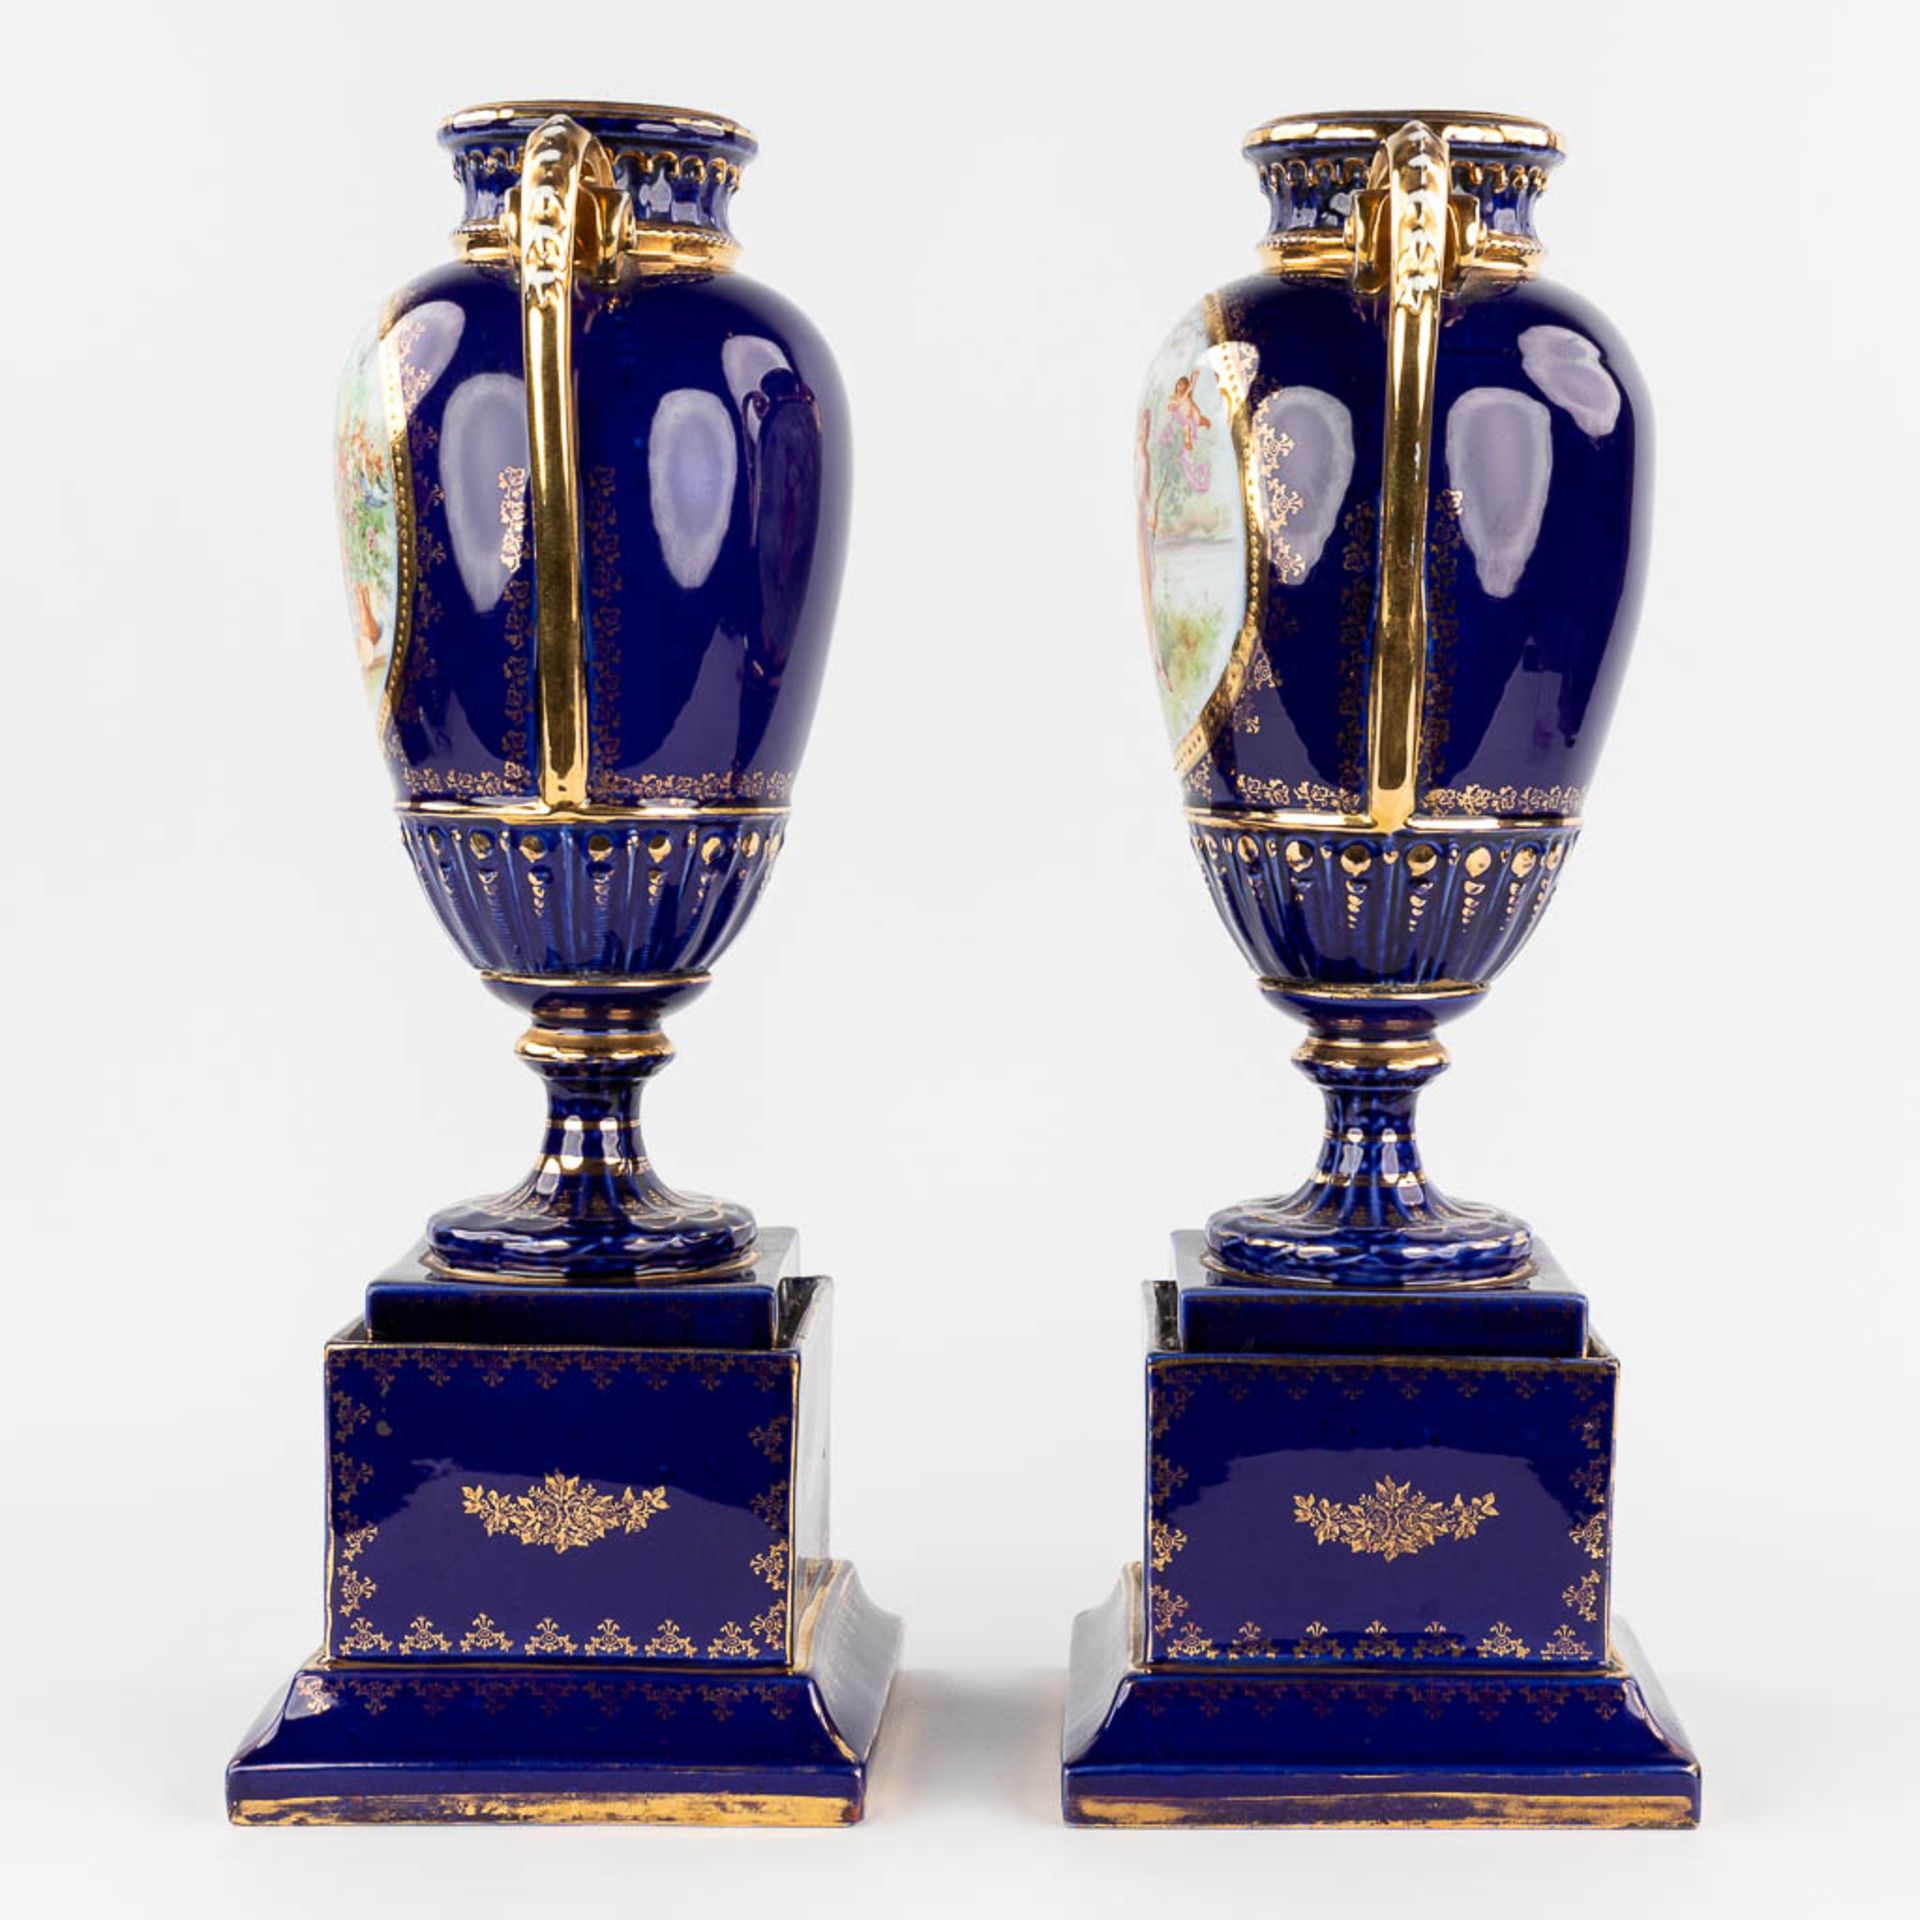 A pair of vases, with a transferprint decor. 20th C. (L: 18 x W: 18 x H: 50 cm) - Image 6 of 12